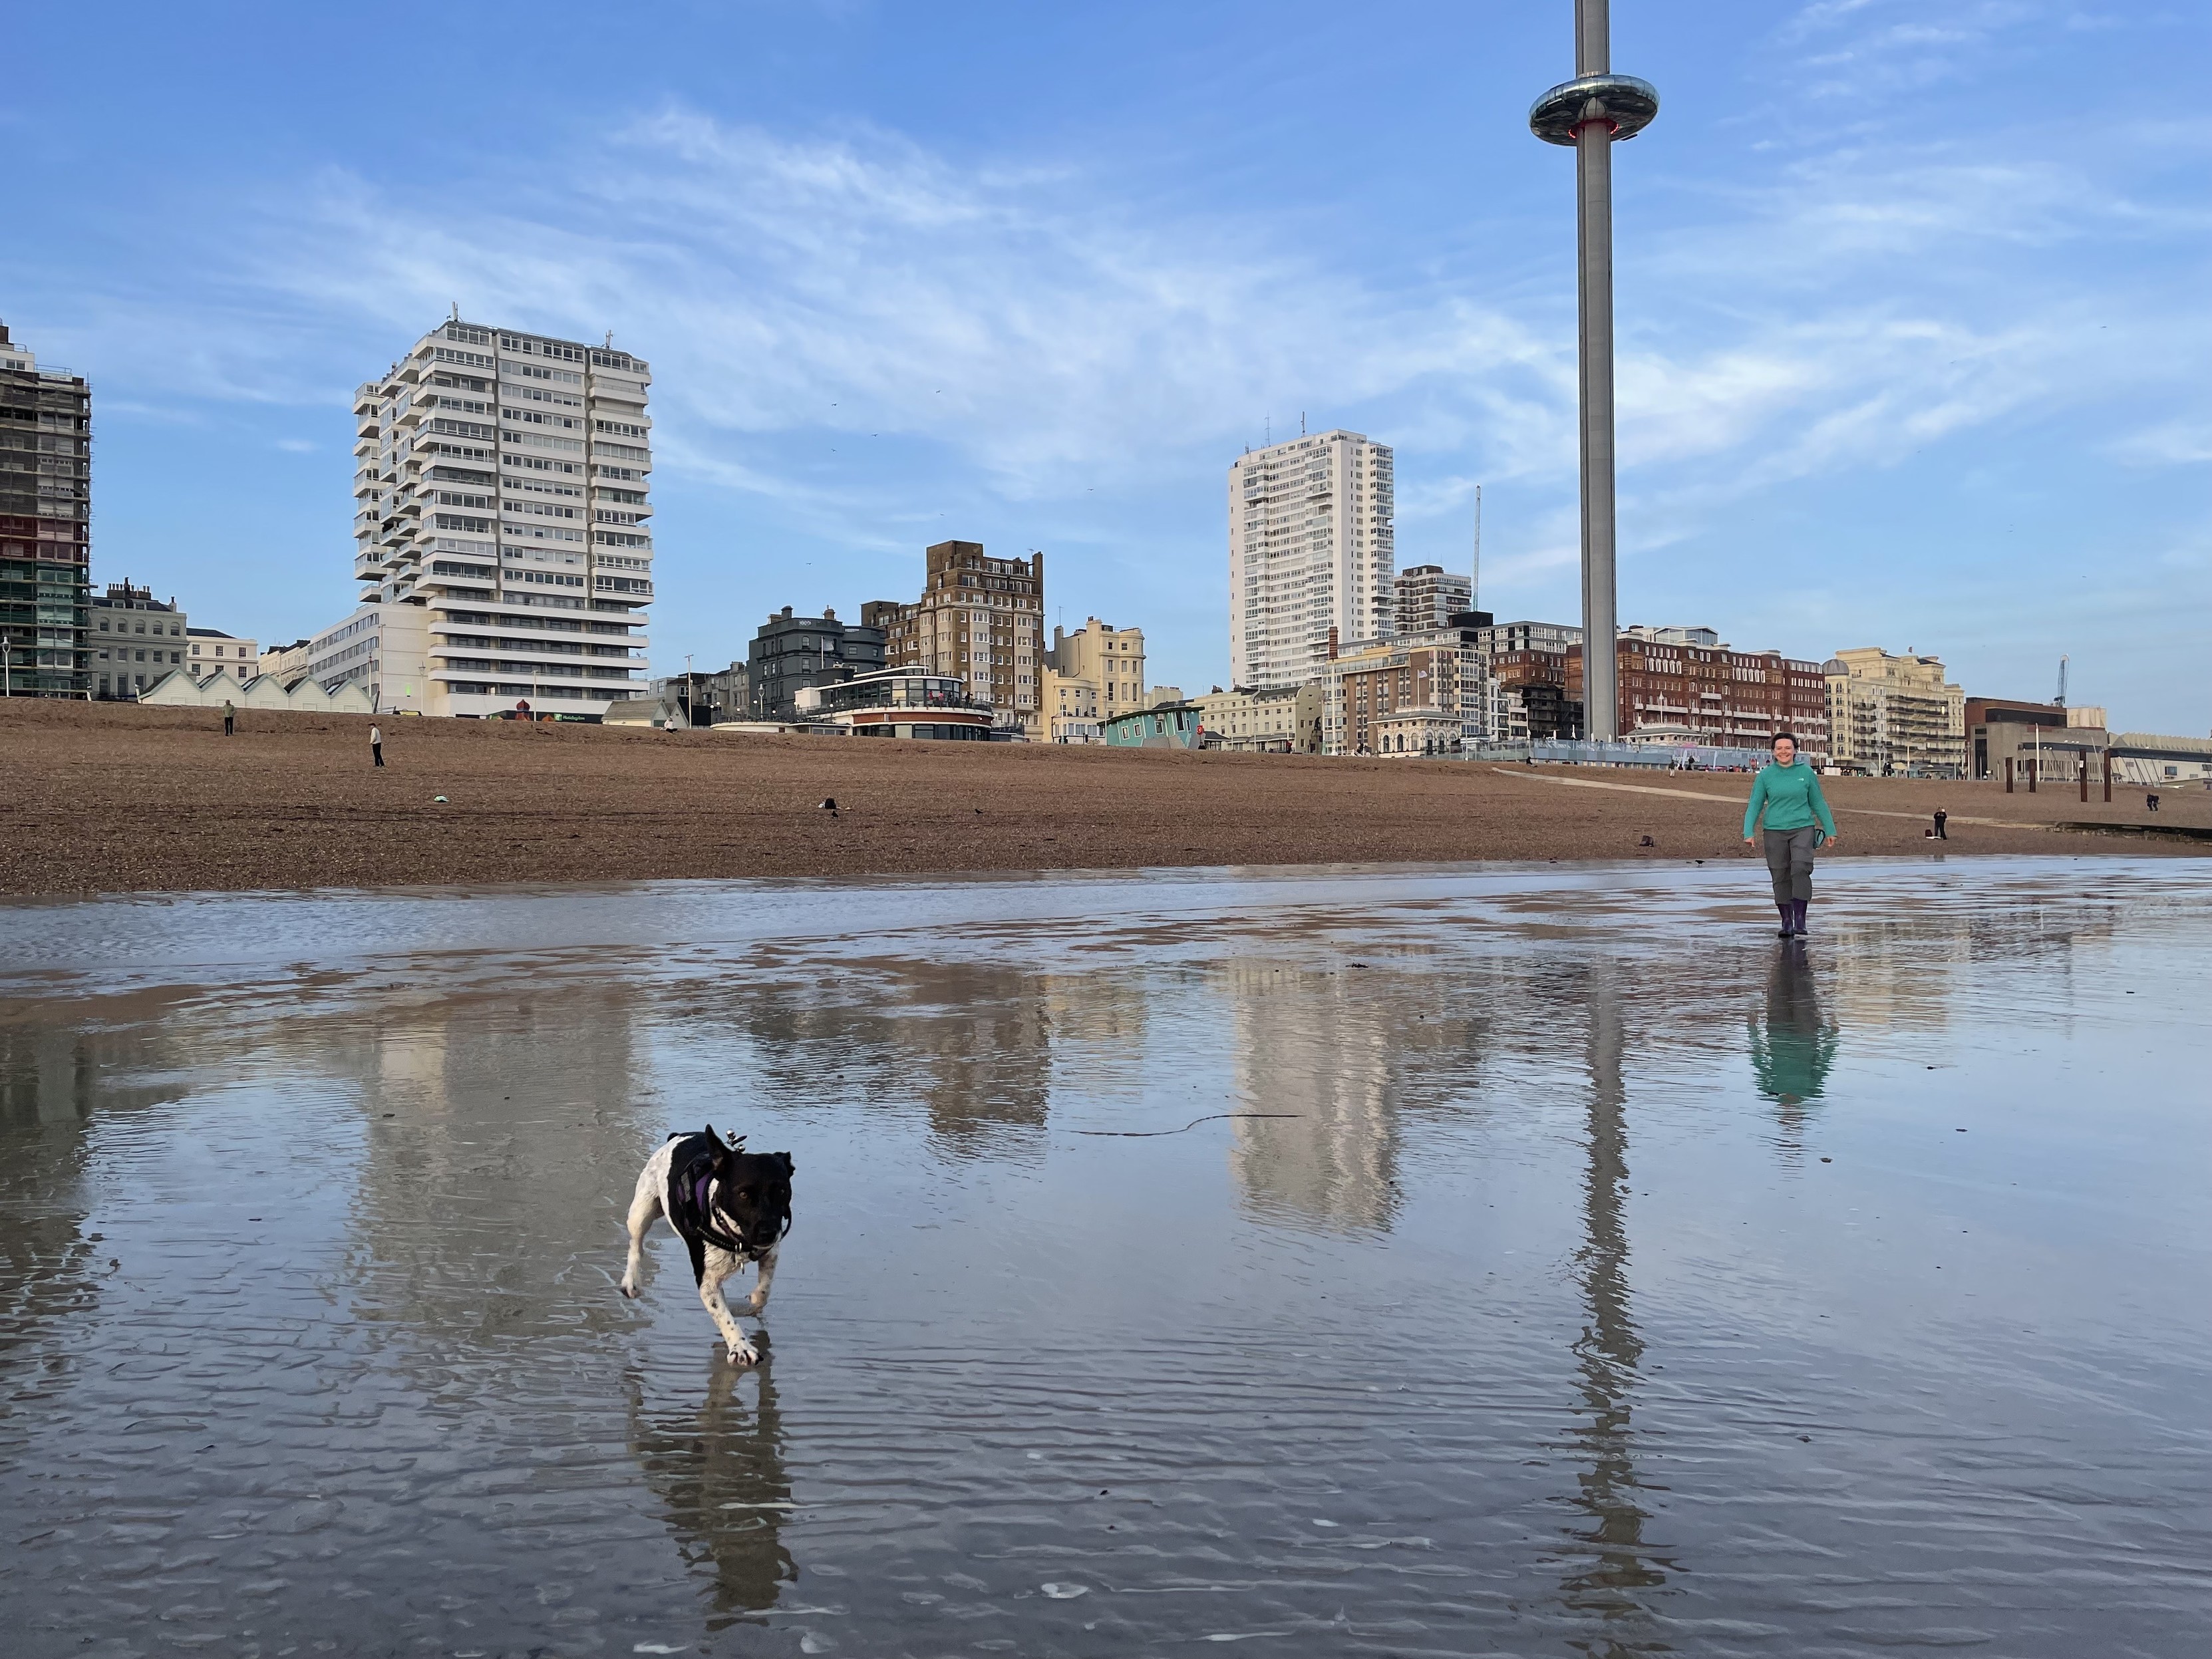 A small back and white terrier running towards you, on the beach in Brighton at low tide. The i360 tower is in the background.